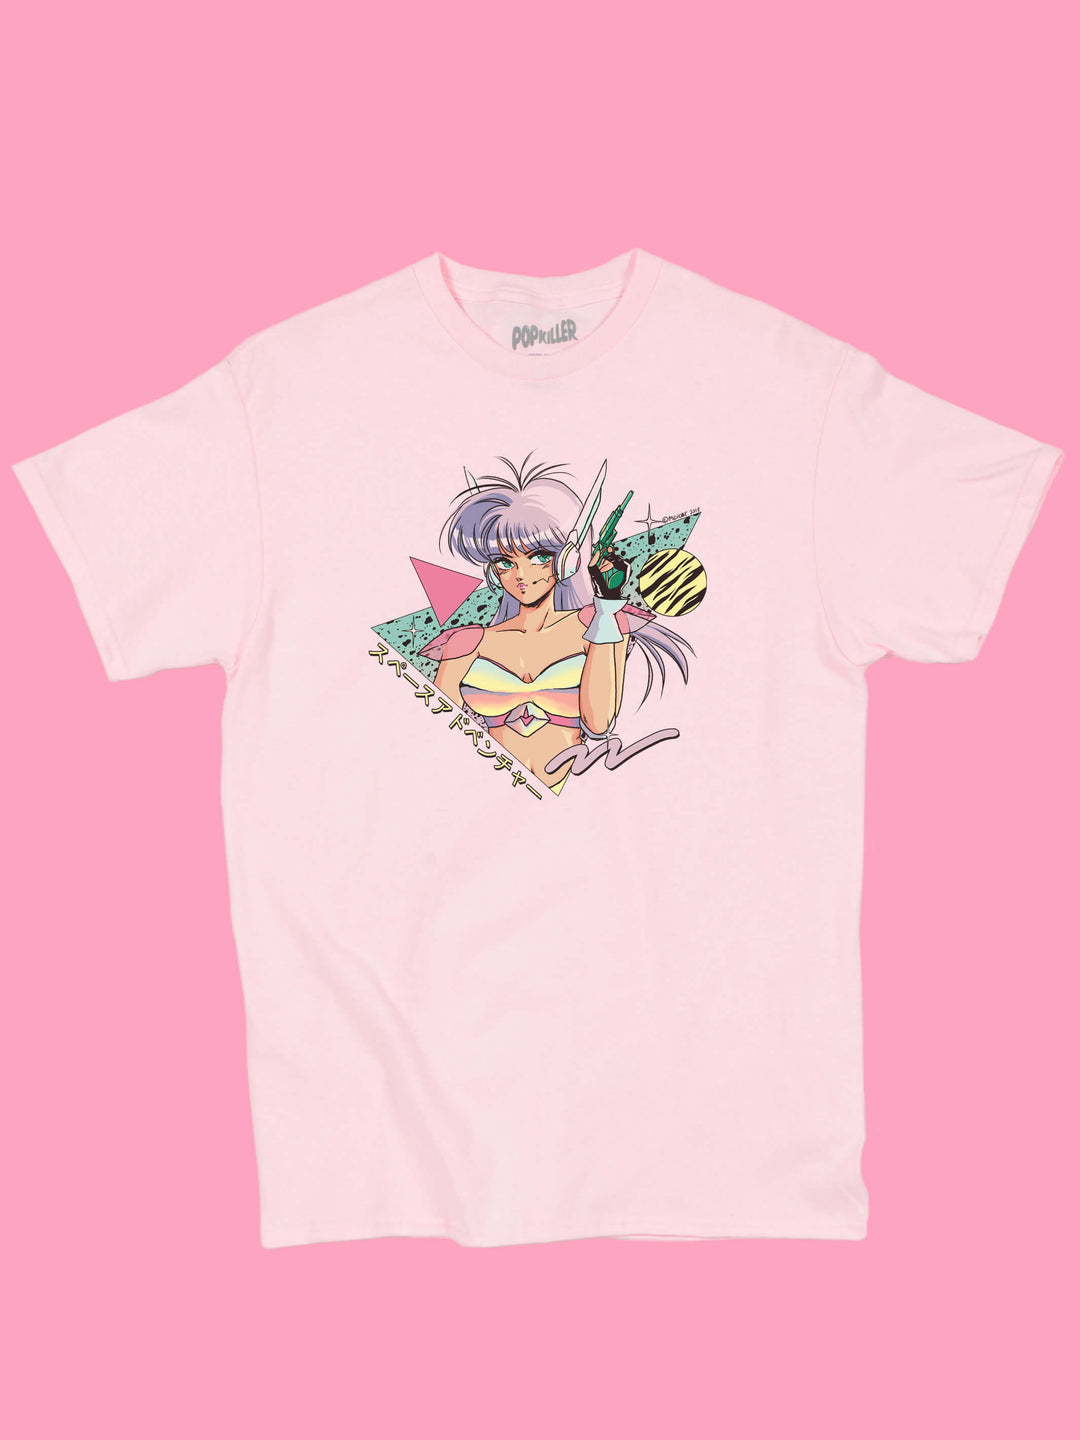 Pink graphic tee with sci fi anime girl by vaporwave artist Mizucat.